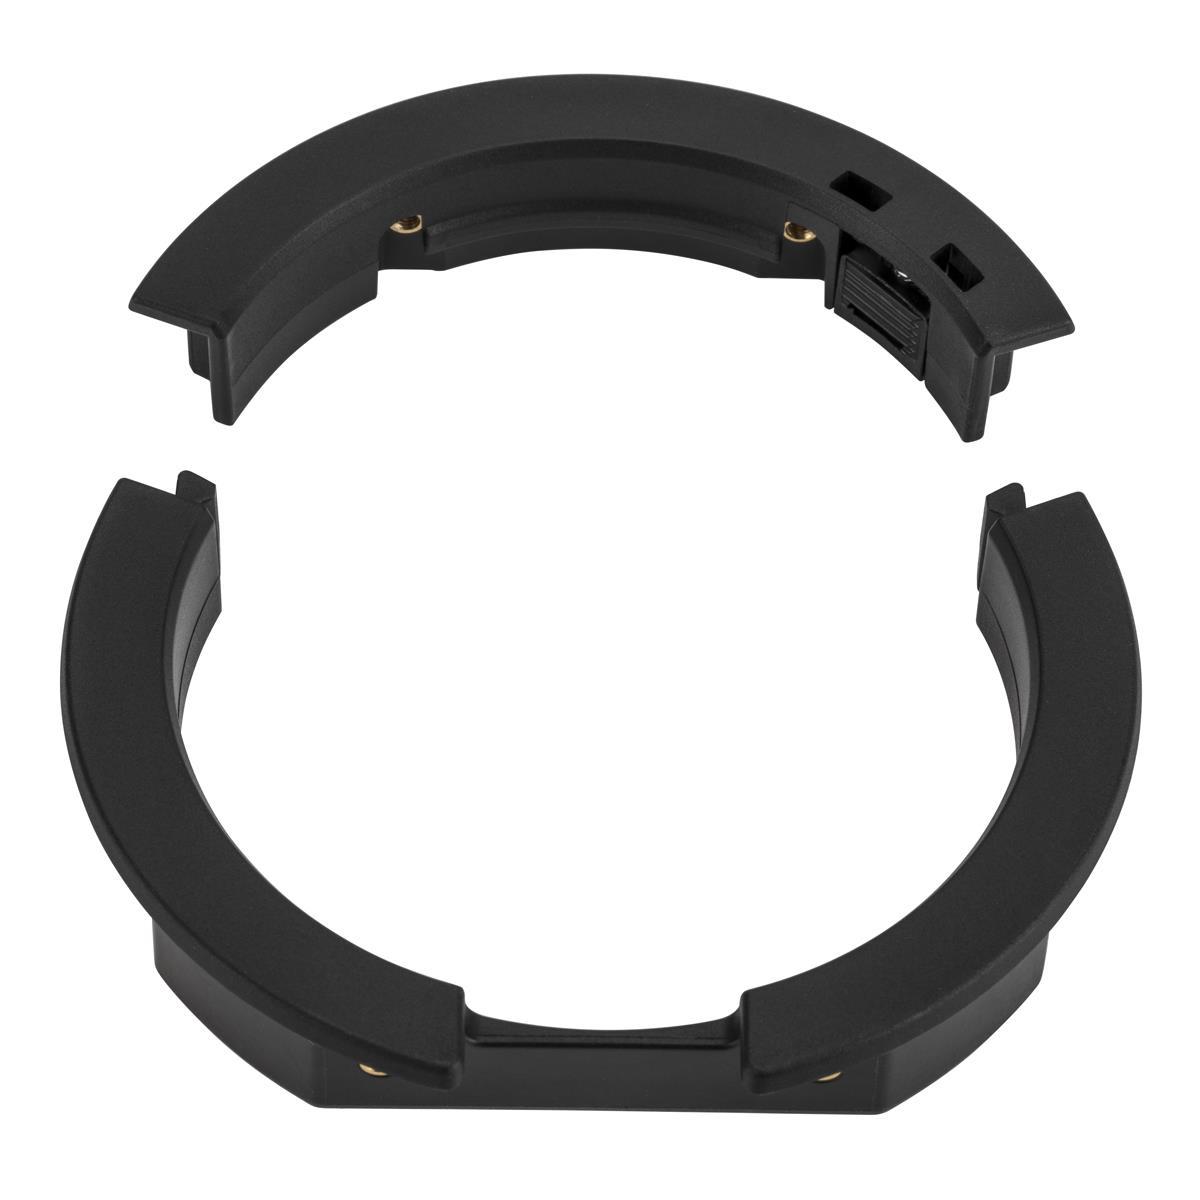 Godox AD-AB Adapter Ring For The AD300 Pro Monolight